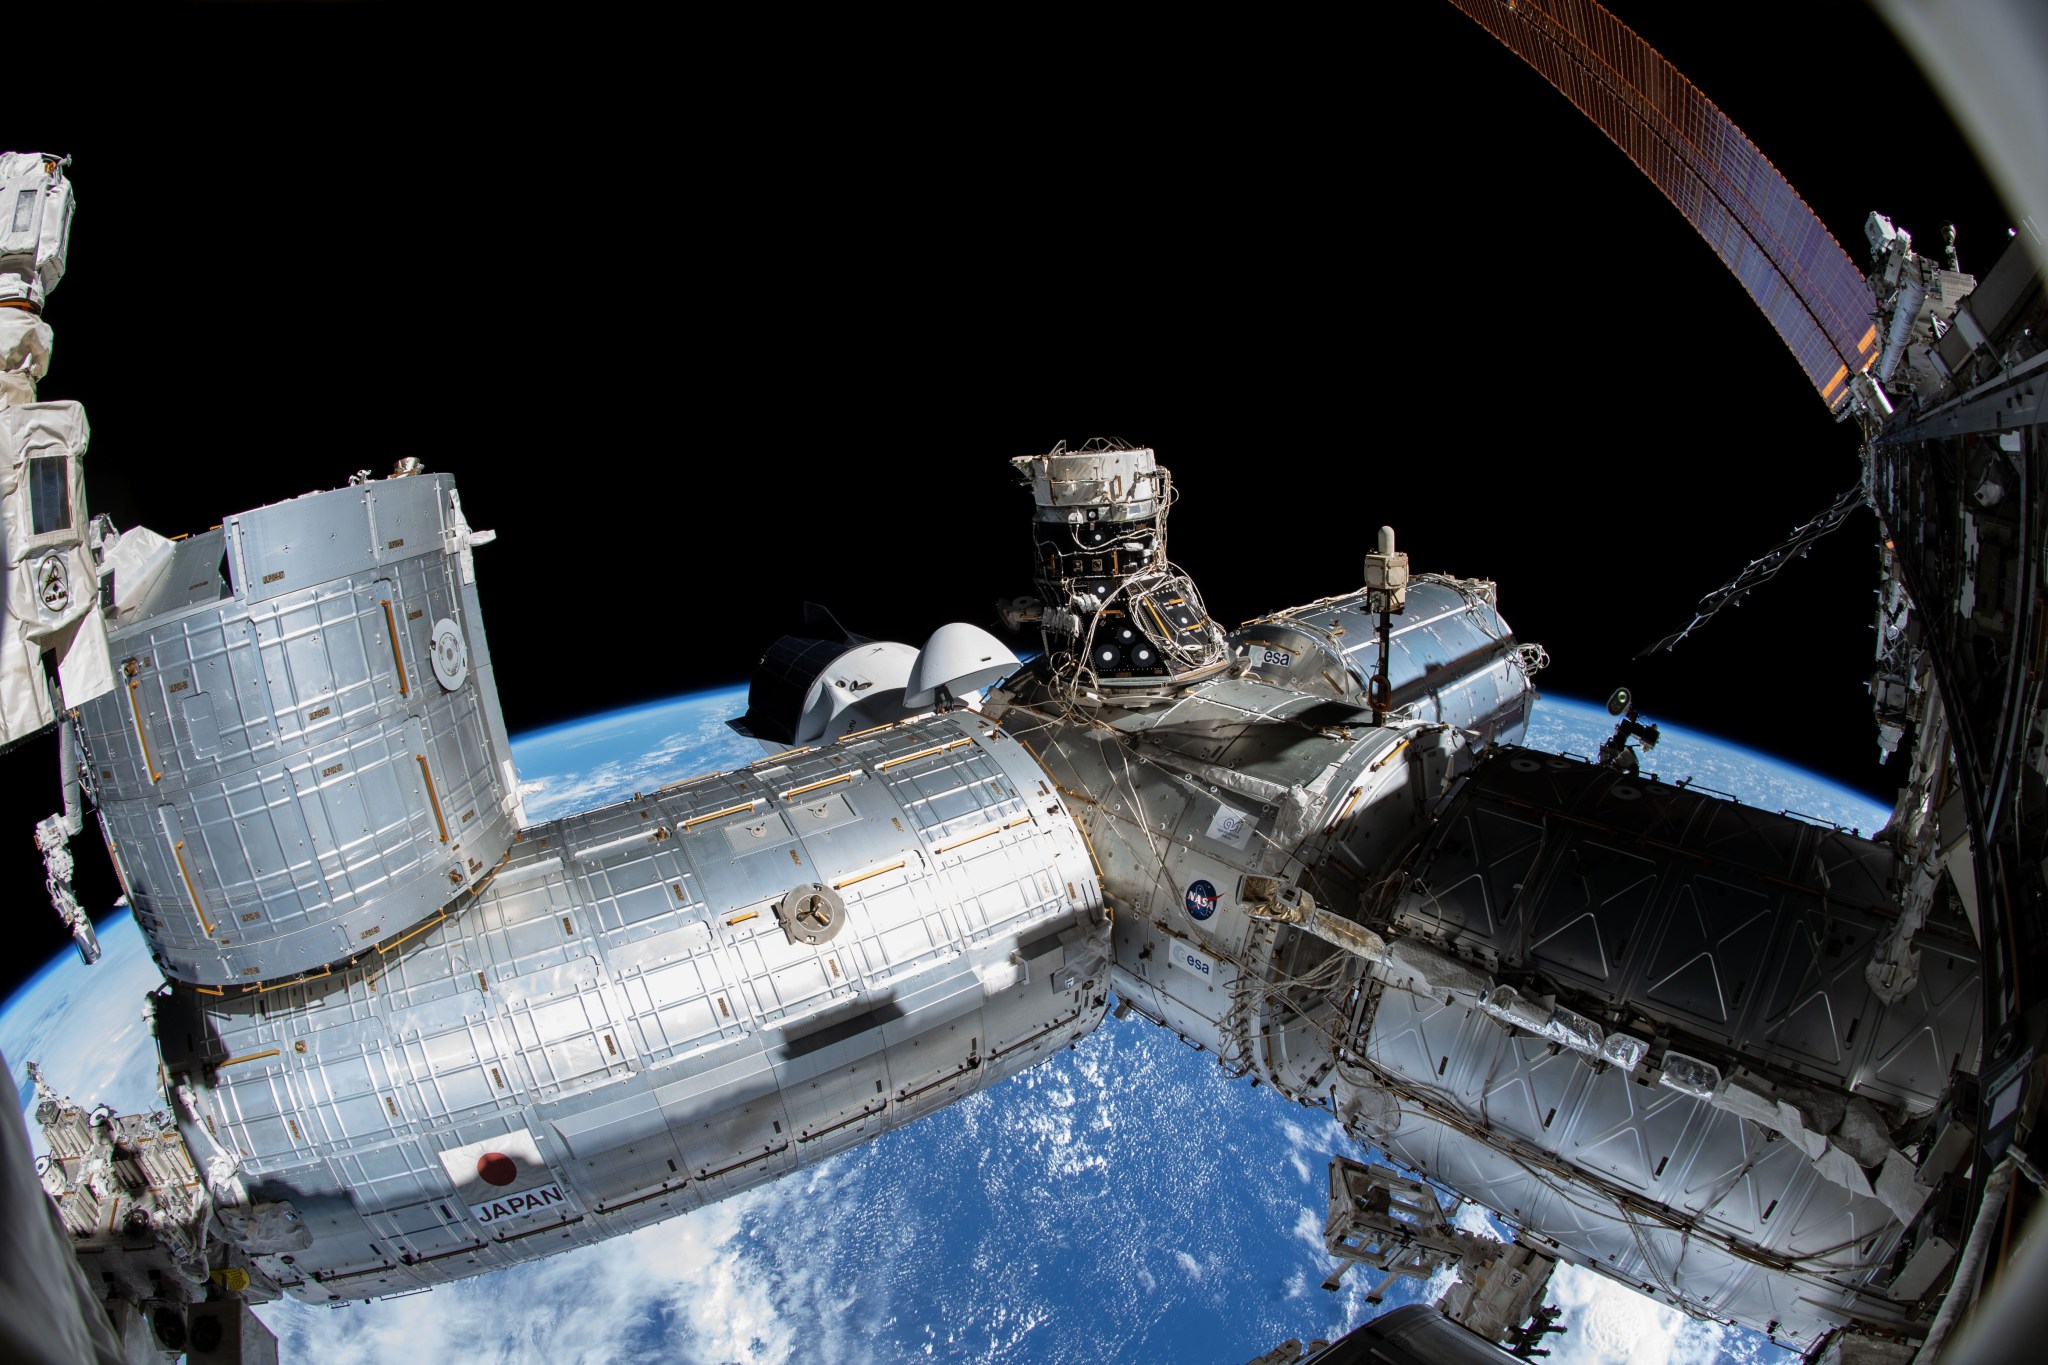 The Harmony module connects the Destiny, Columbus, and Kibo laboratory modules on the International Space Station. It also provides international docking adapters on its space-facing and forward ports for commercial crew vehicles.